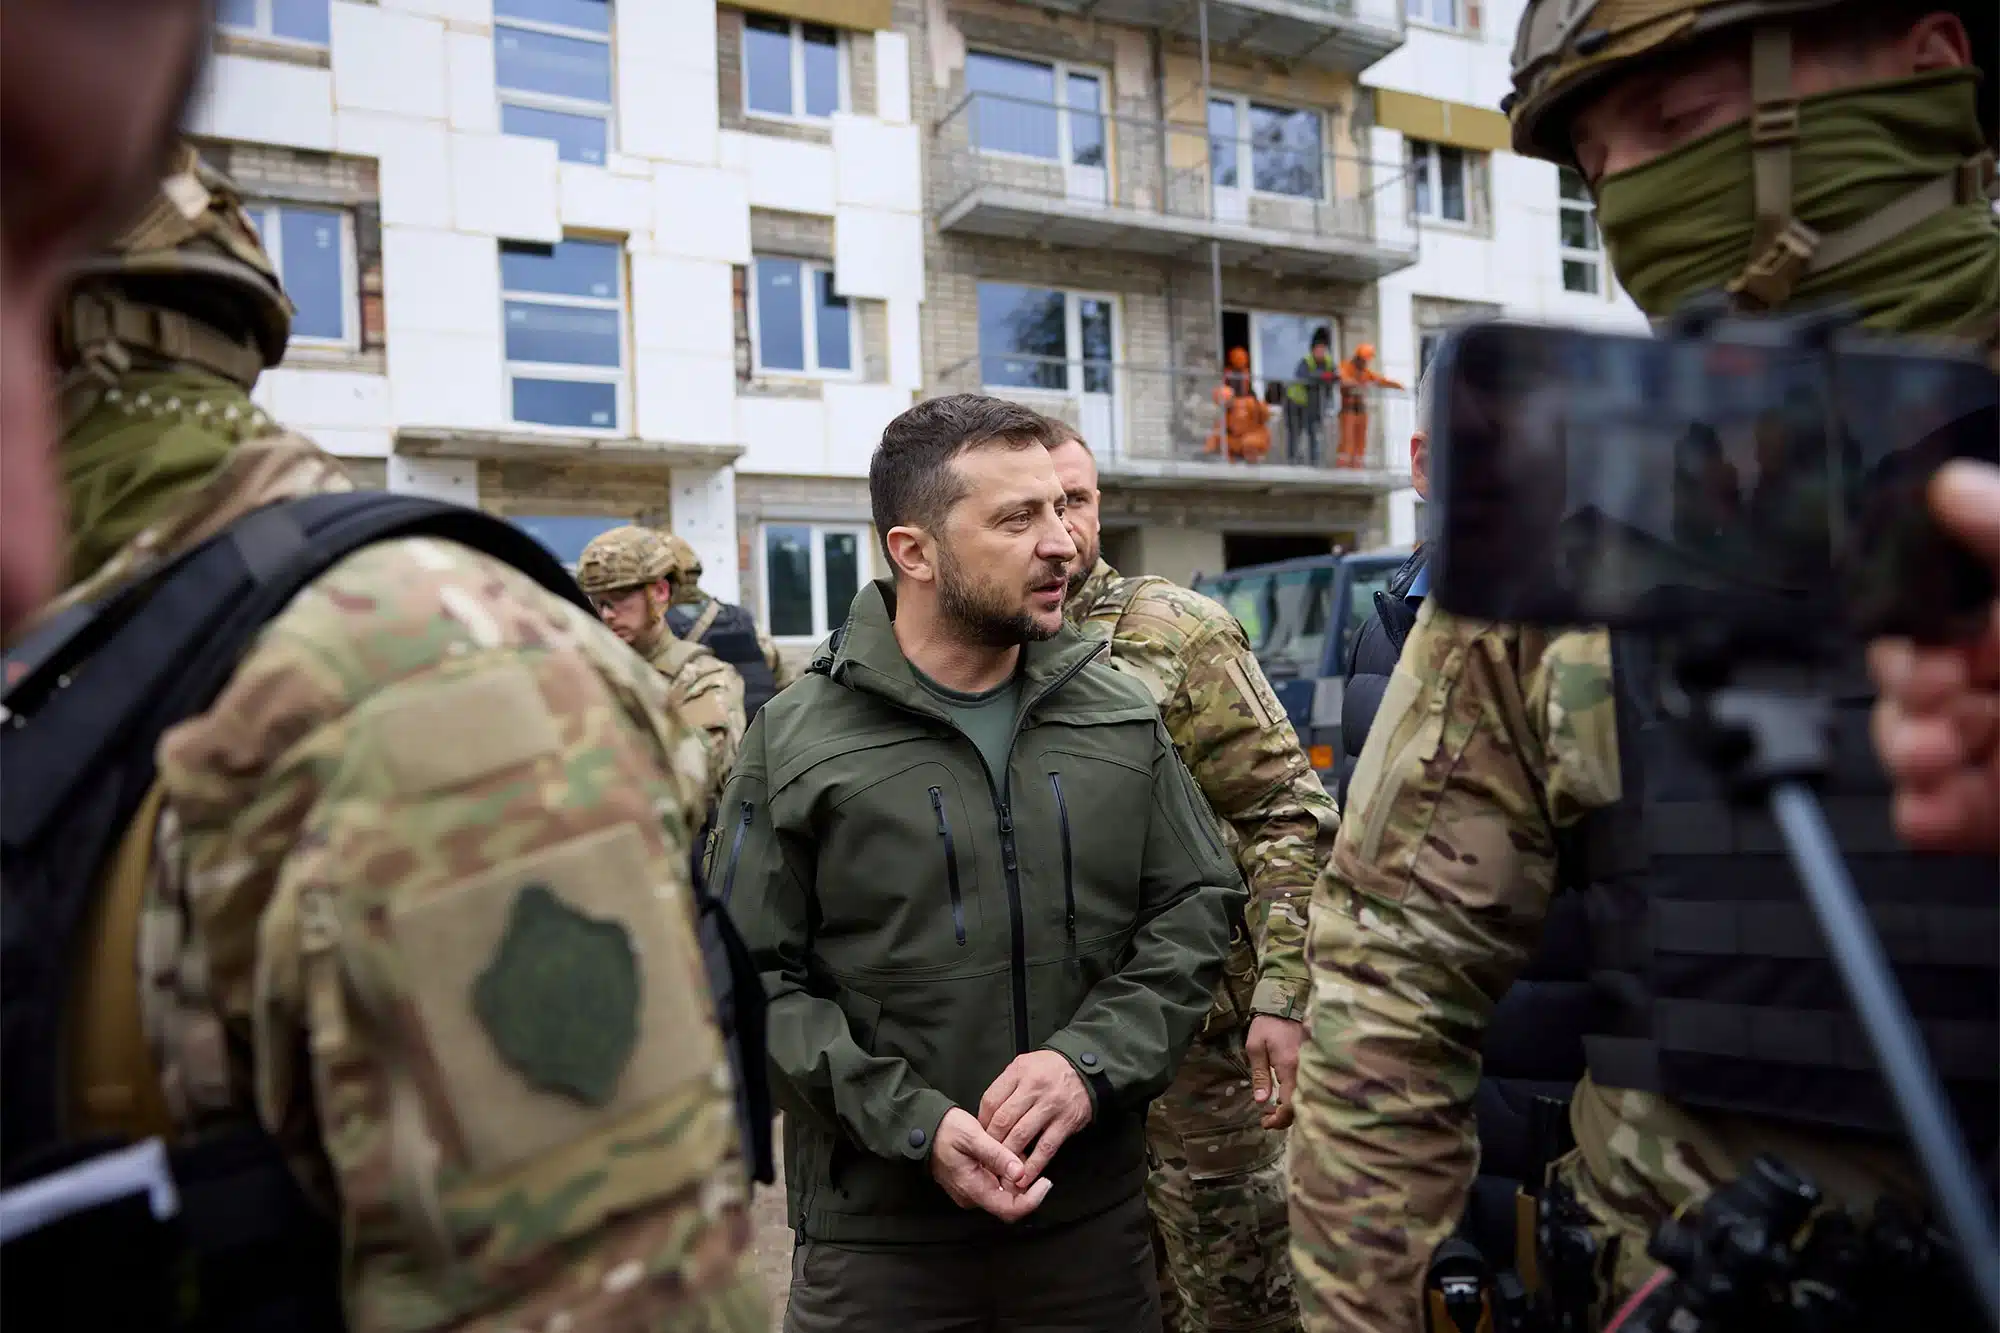 Is the United States Losing Its Control of Ukraine?